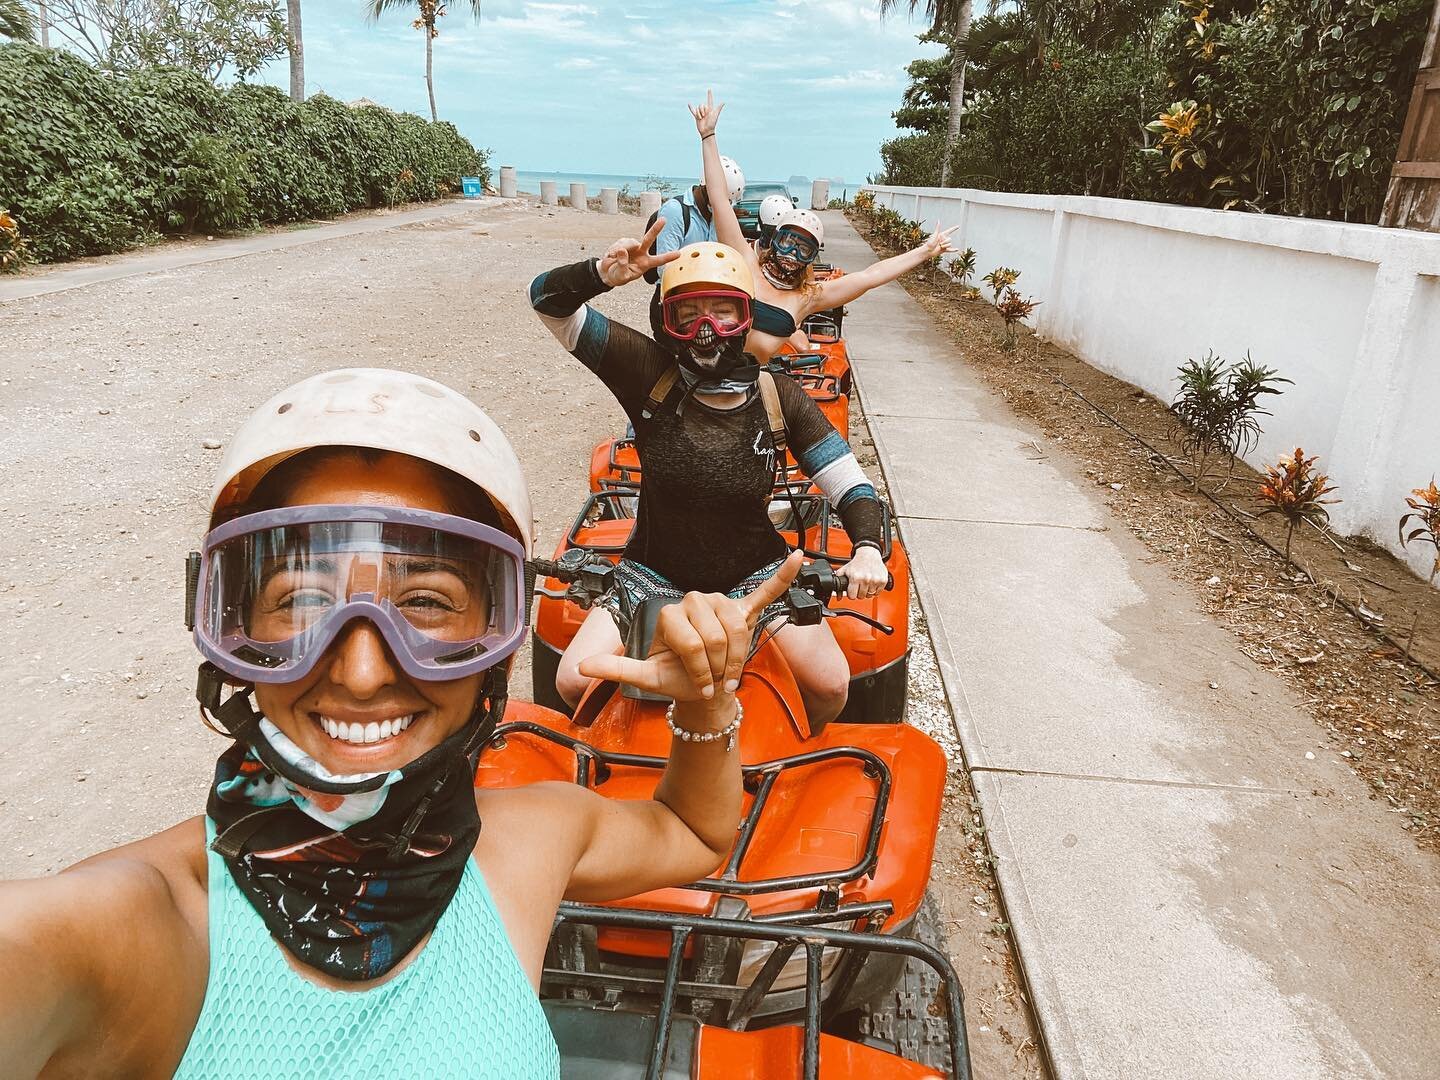 Day 5 of our Costa Rica THRIVE retreat was all about getting dirty out in nature!🔥

We ripped it up on ATVs and drove through dirt back roads and on the beach! Then finished eating amazing tacos on the beach. 🌮 (Scroll 👉🏼 to see how dirty we got.